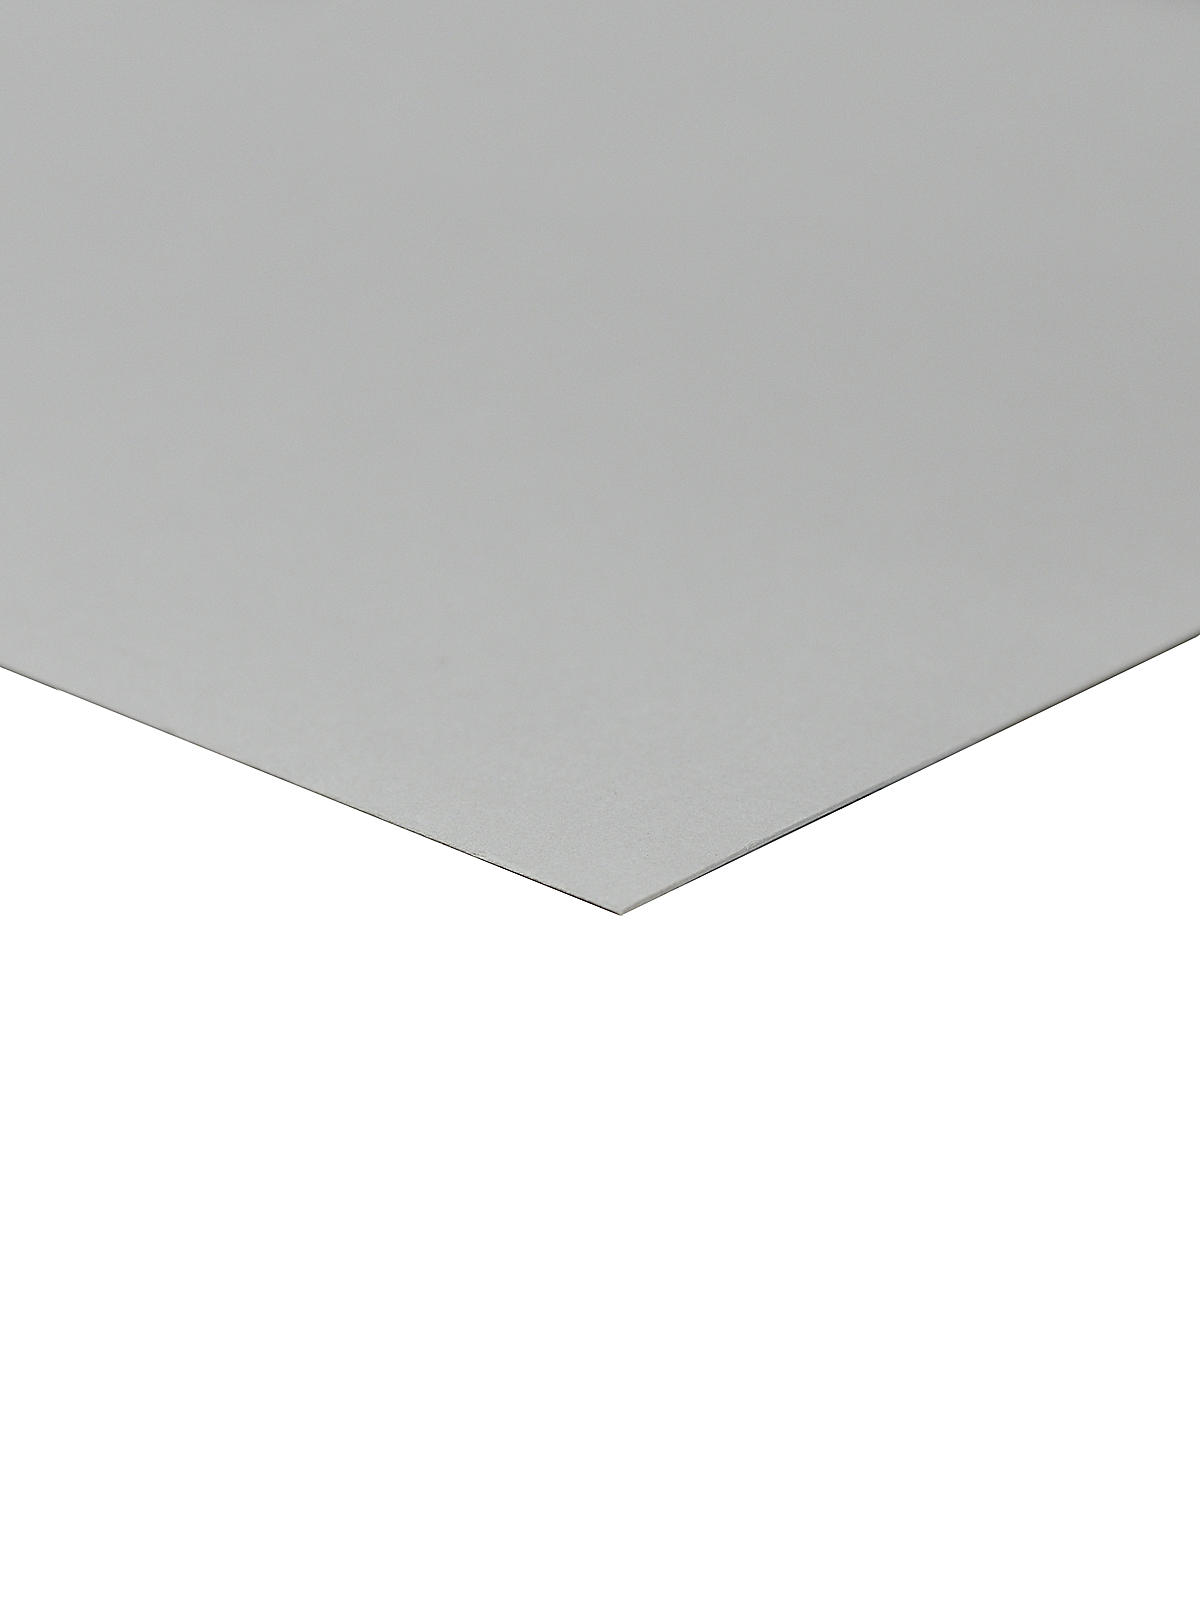 Museum Mounting Board Acid Free Gray 2 Ply Each